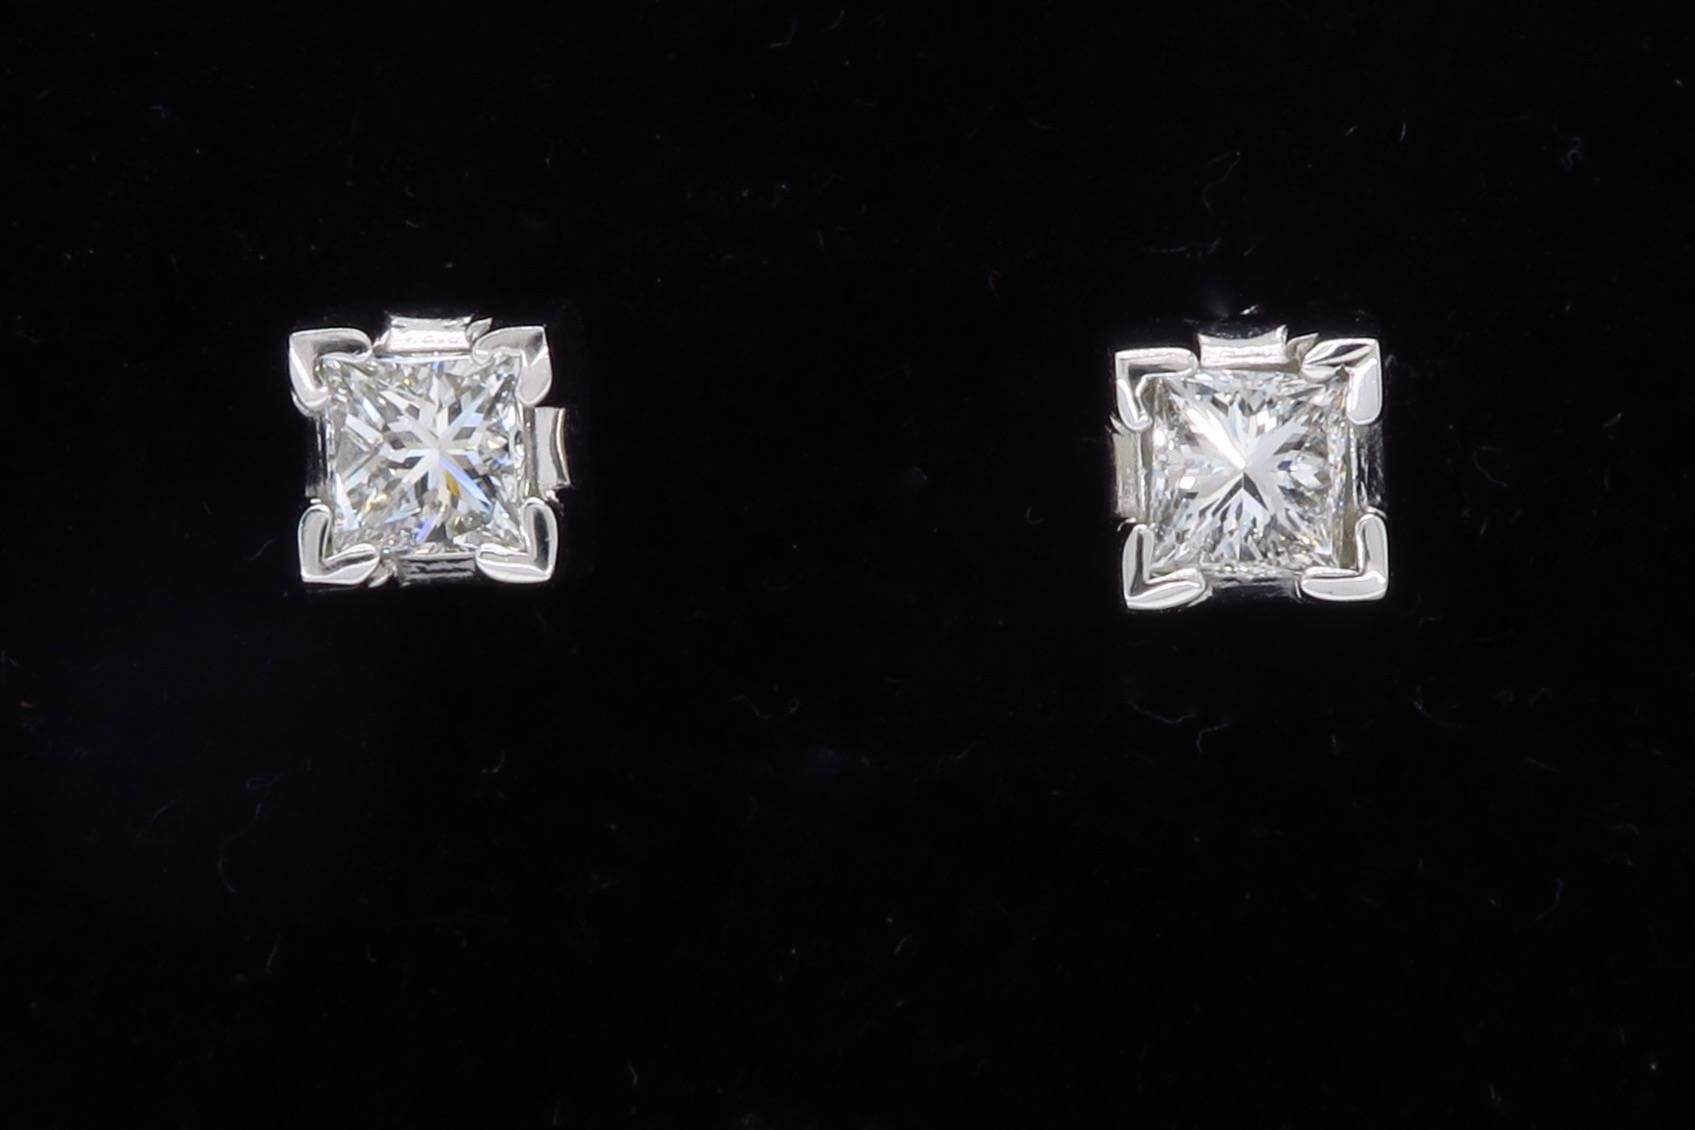 These beautiful earrings feature two Princess Cut Diamonds. The diamonds have G-H color and SI clarity. The total diamond weight is approximately .50CTW. The 14K white gold earrings weigh 1.3 grams.